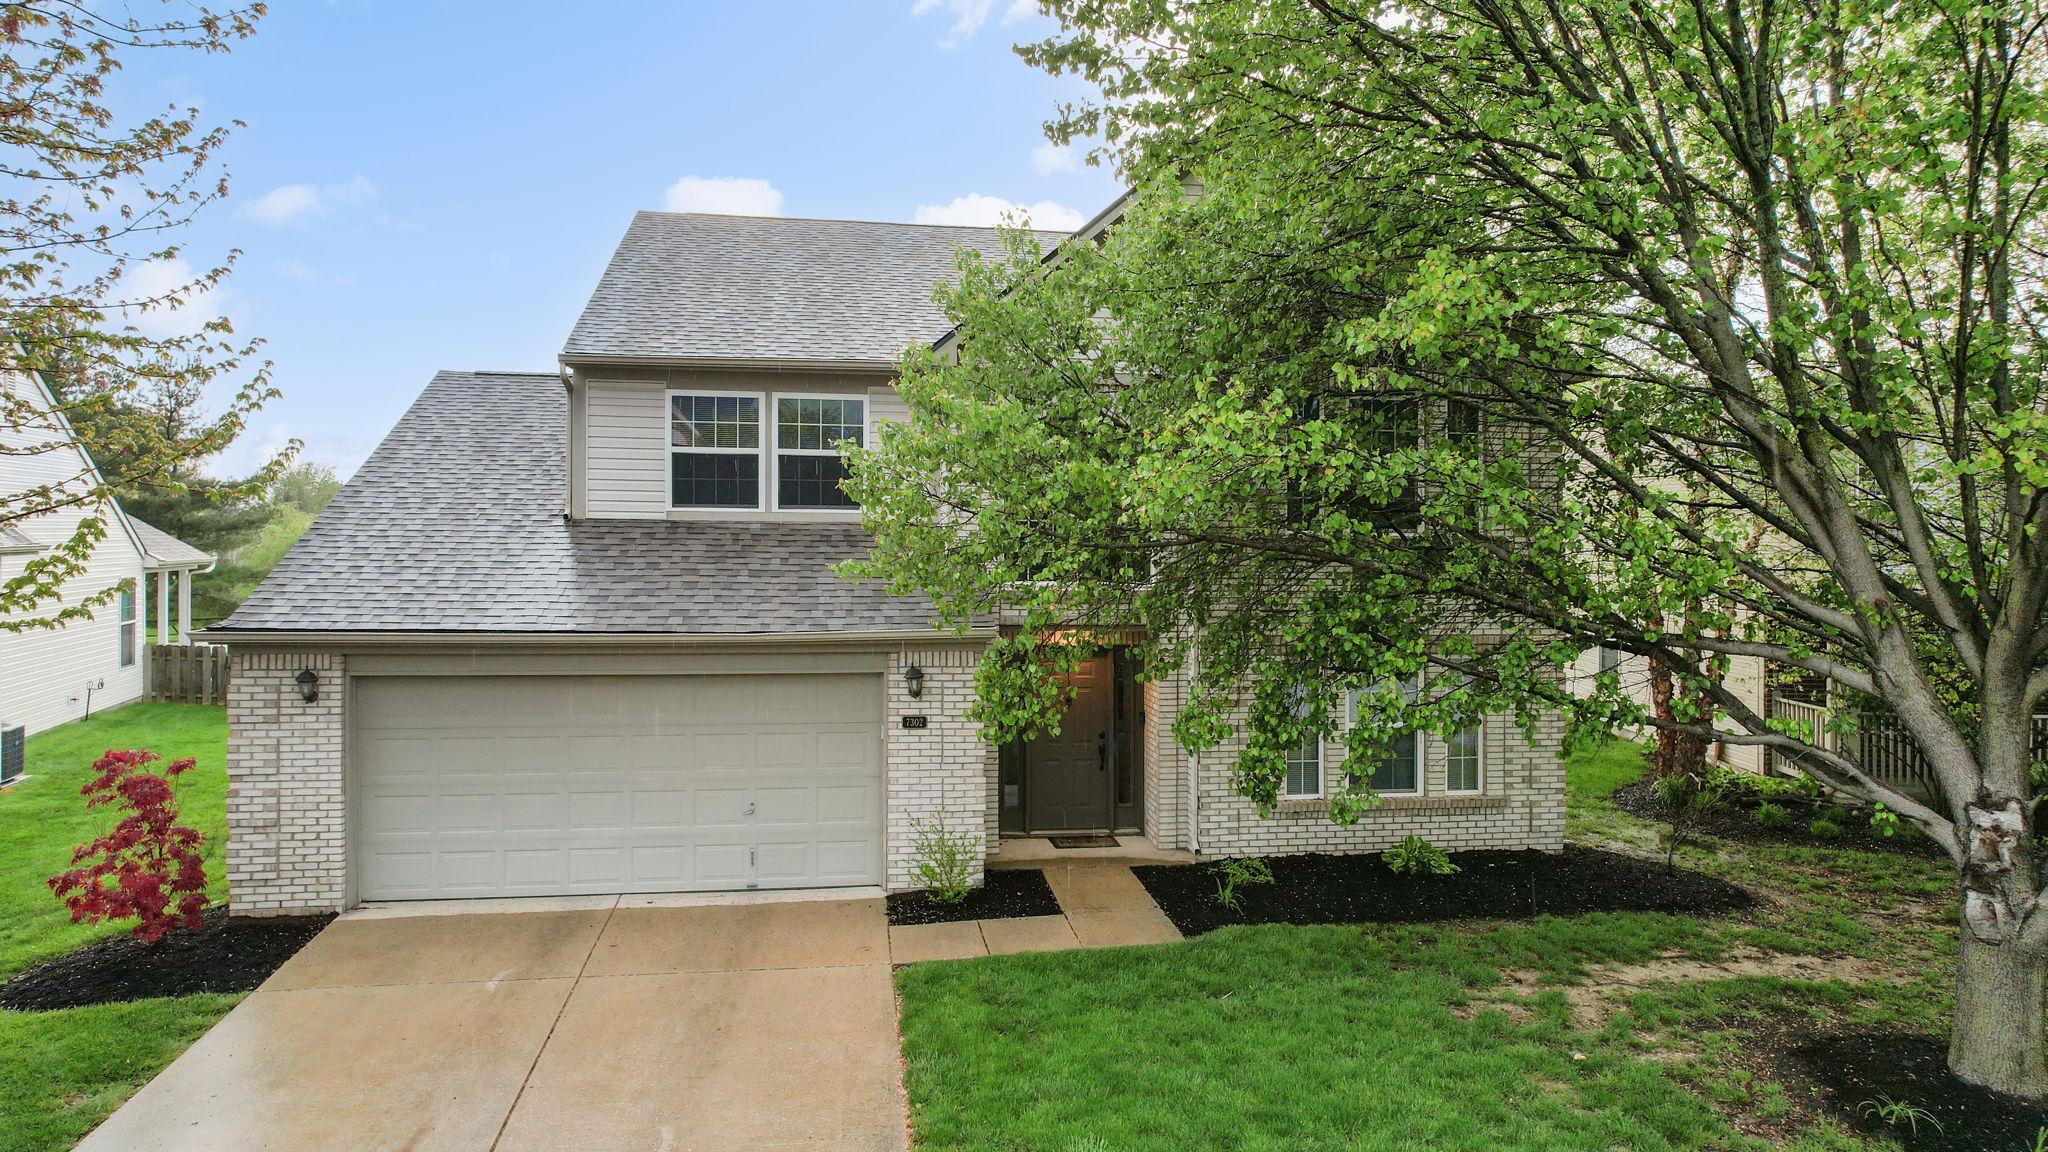 Photo one of 7302 Sycamore Run Dr Indianapolis IN 46237 | MLS 21974545